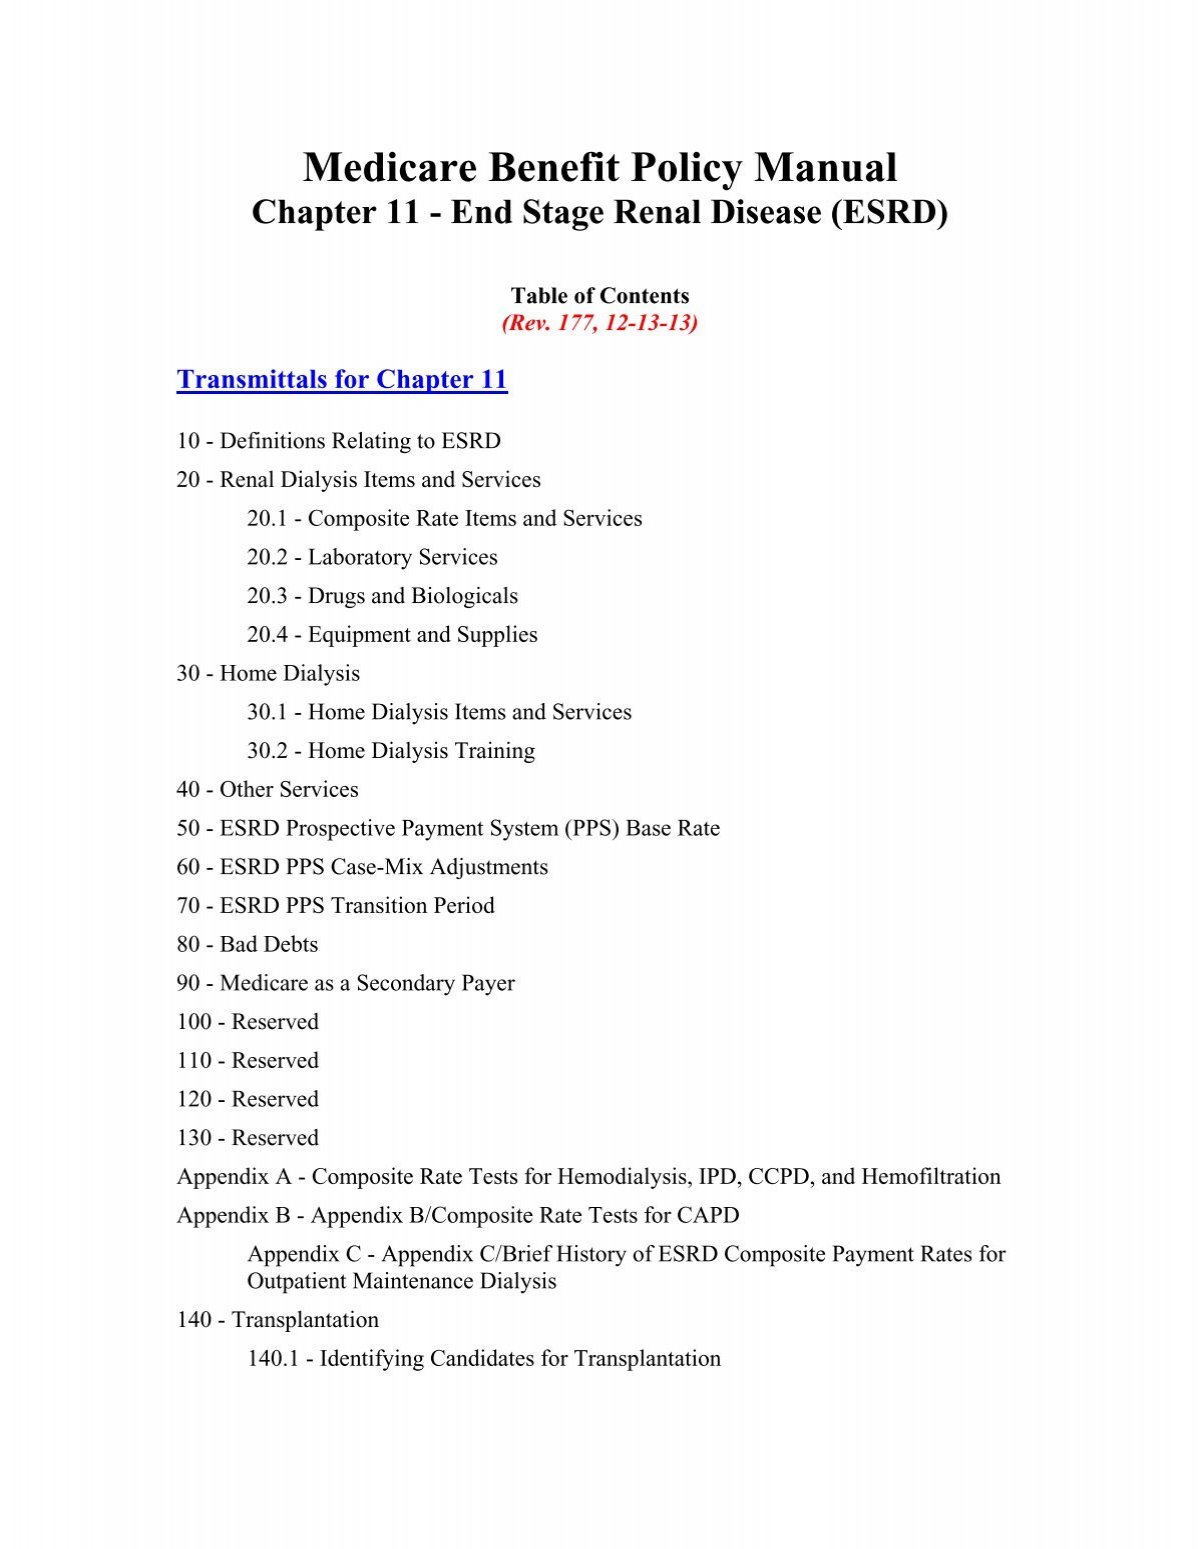 medicare-benefit-policy-manual-chapter-11-end-stage-renal